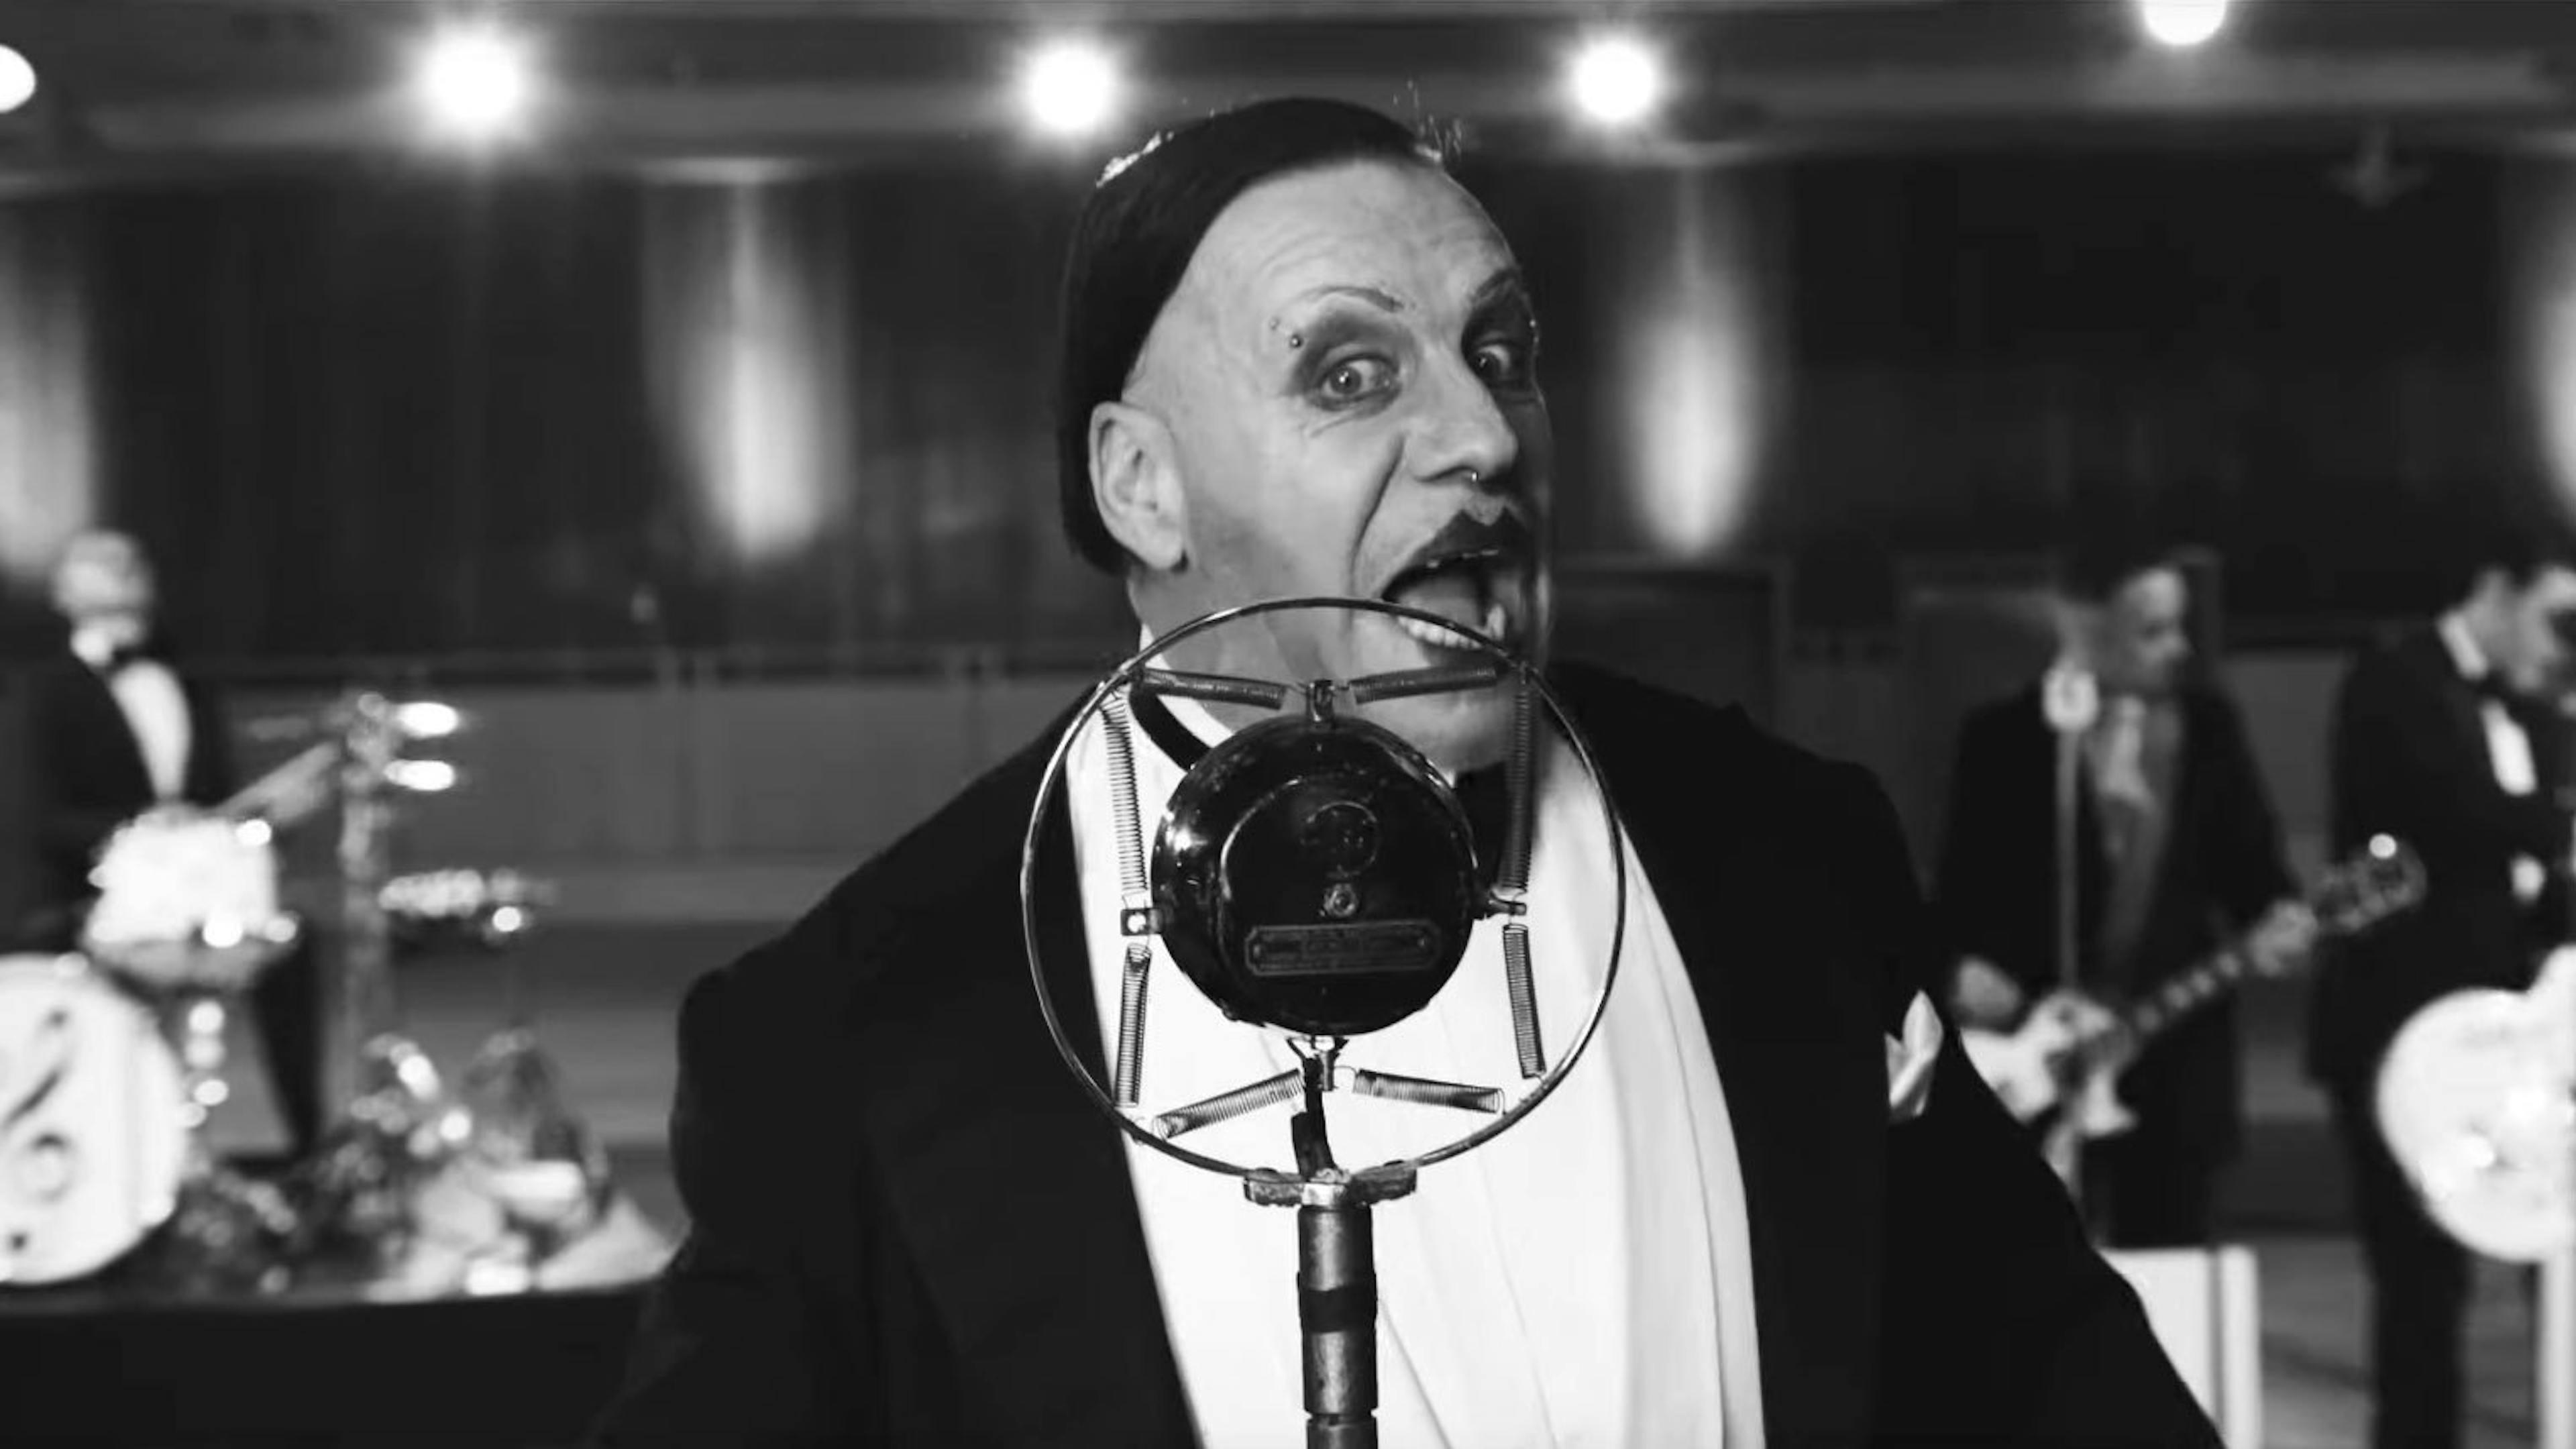 Watch Video For Rammstein's New Song Radio